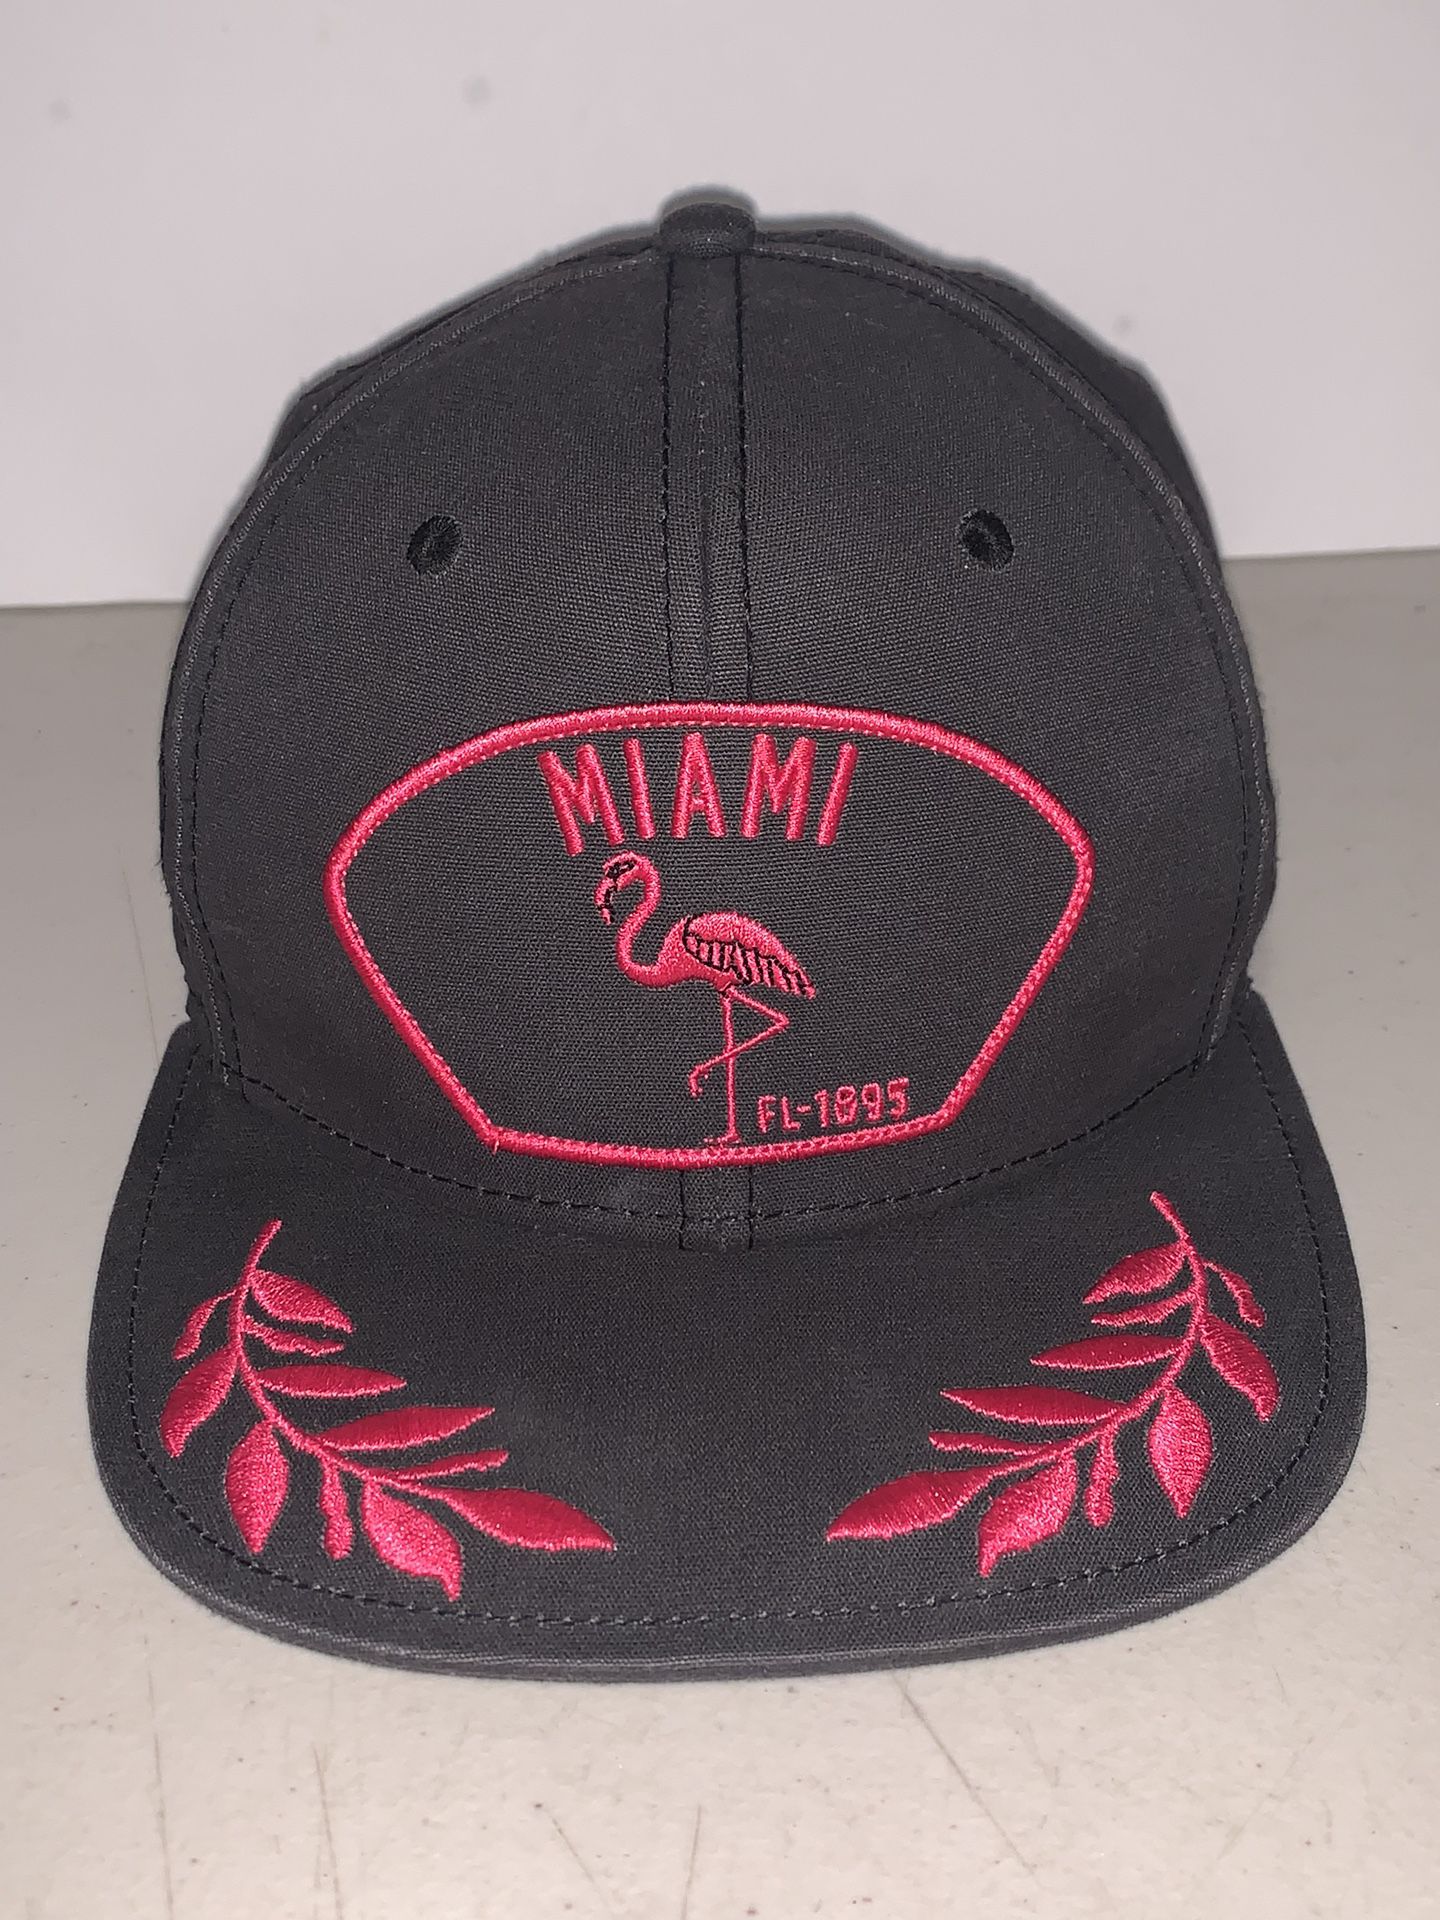 Goorin Bros Miami Snapback Hat Black Neon Pink Embroidered Patch Retired